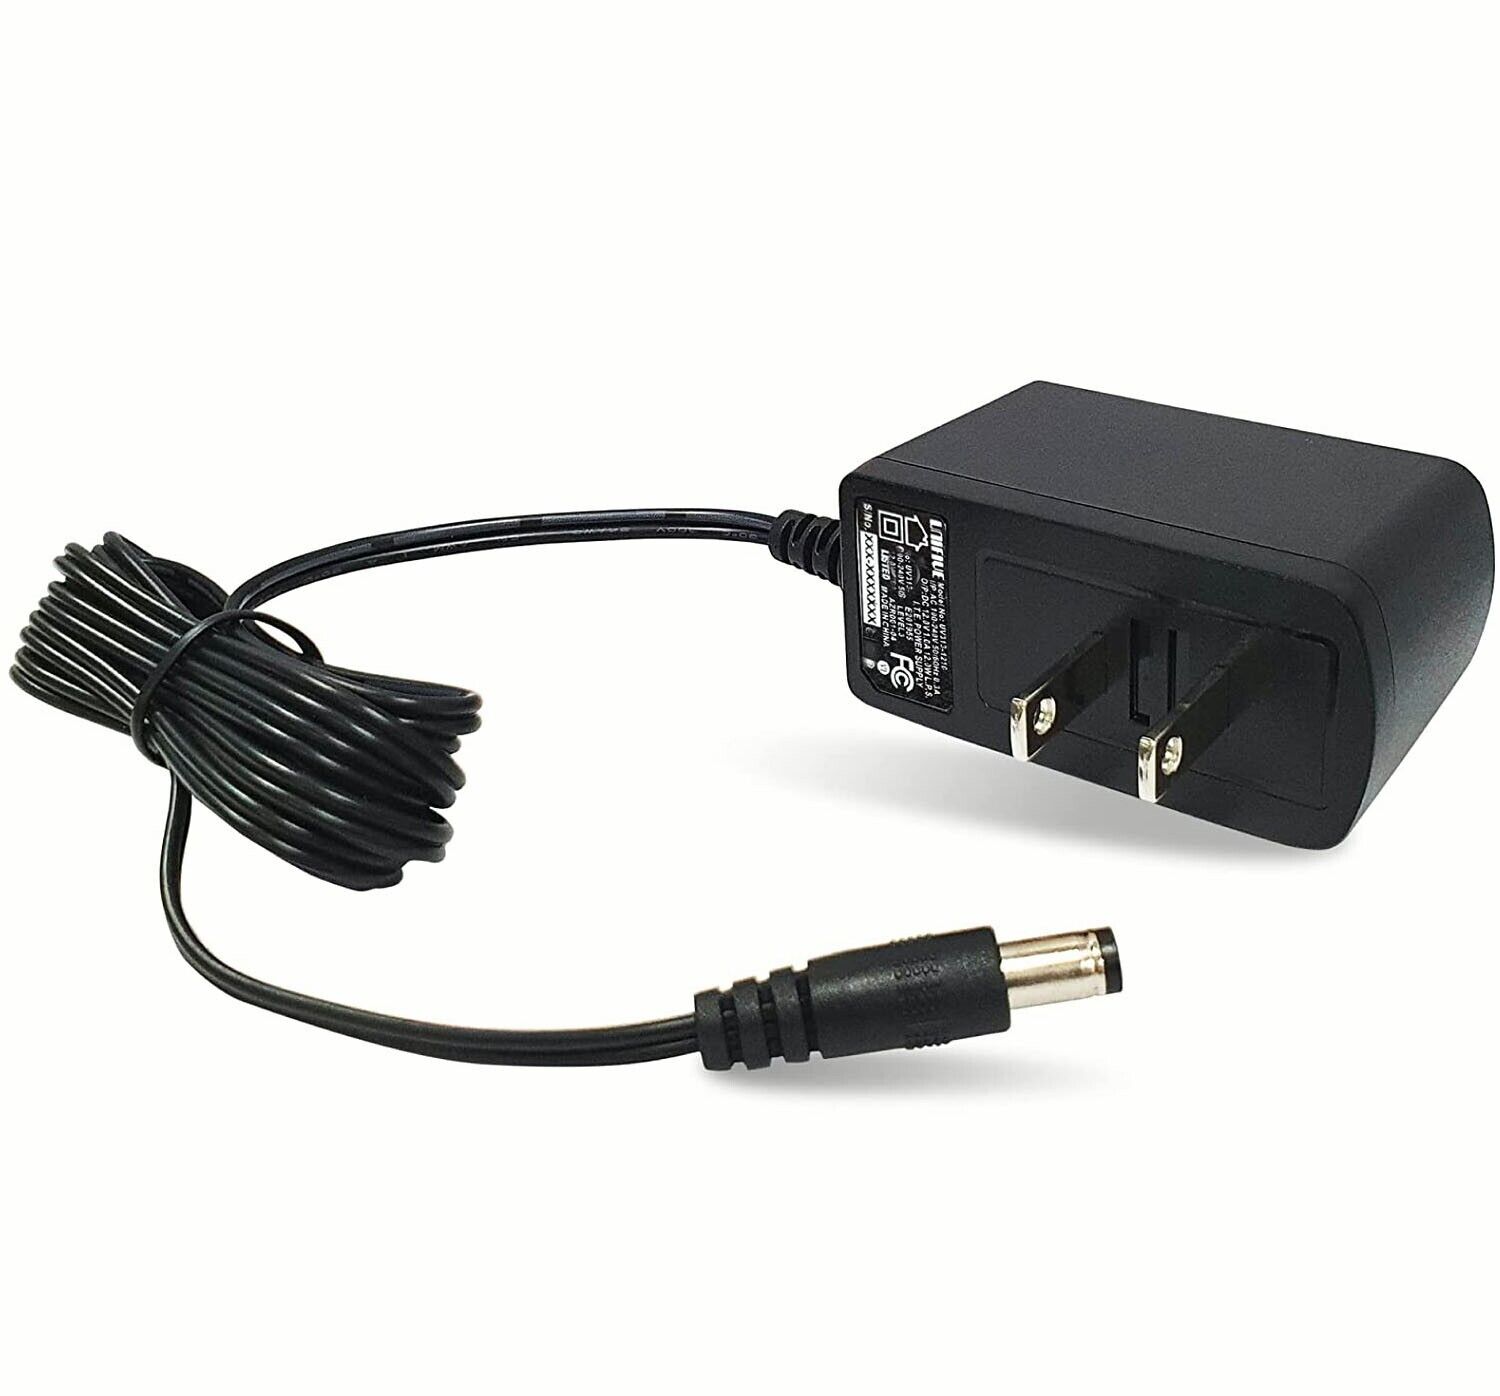 AC/DC Power Supply Charger for OTC Genisys Cornwell TechForce & EVO Scanner 3421 NEW Premium CE Certified AC/DC Power S